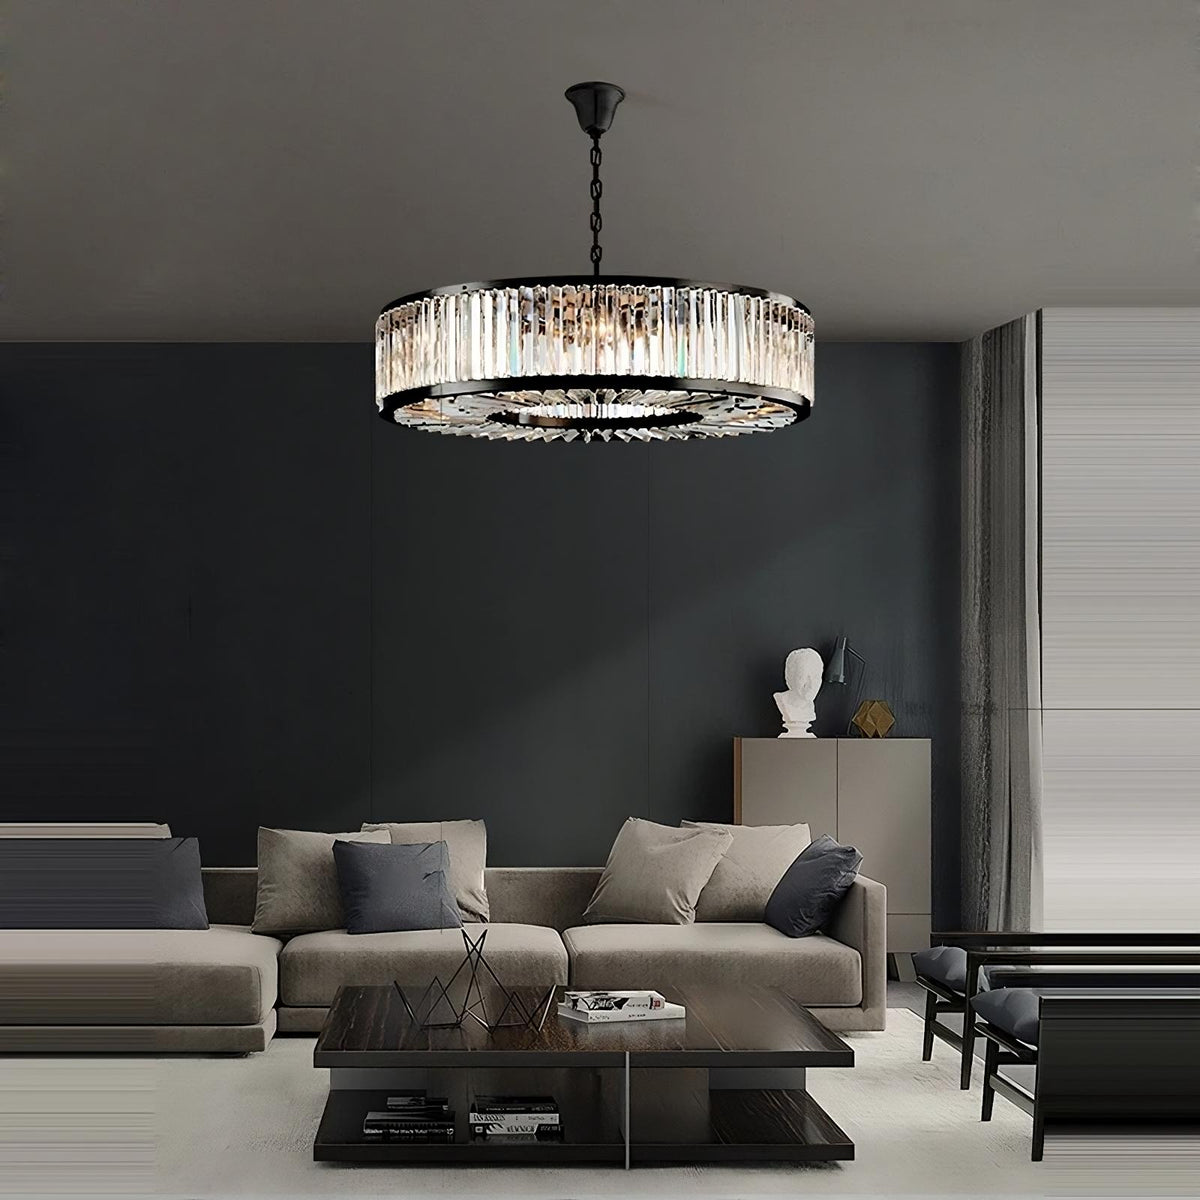 A modern living room with a beige sectional sofa, black and marble coffee table, and minimalist decor. A large Gio Crystal Modern Chandelier by Morsale.com hangs from the ceiling, casting soft, sophisticated lighting over the space. There's a sculpture on a cabinet in the background, enhancing the room's elegance.